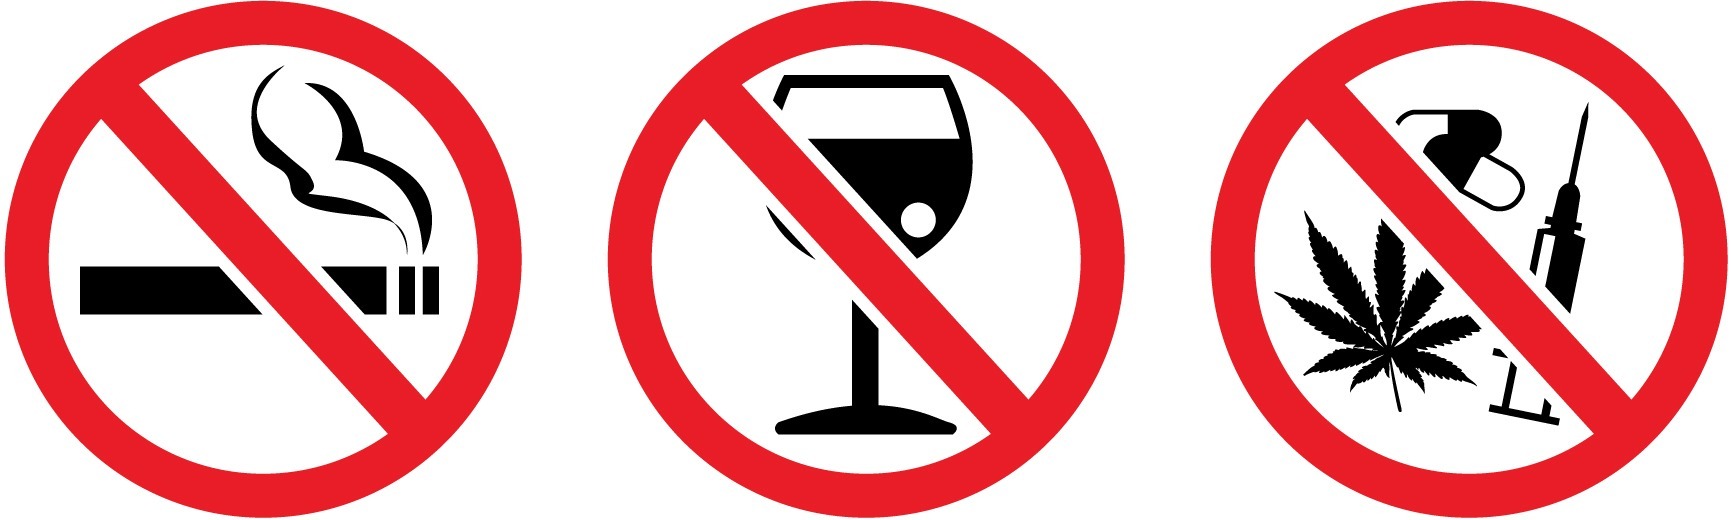 No drugs and alcohol clipart